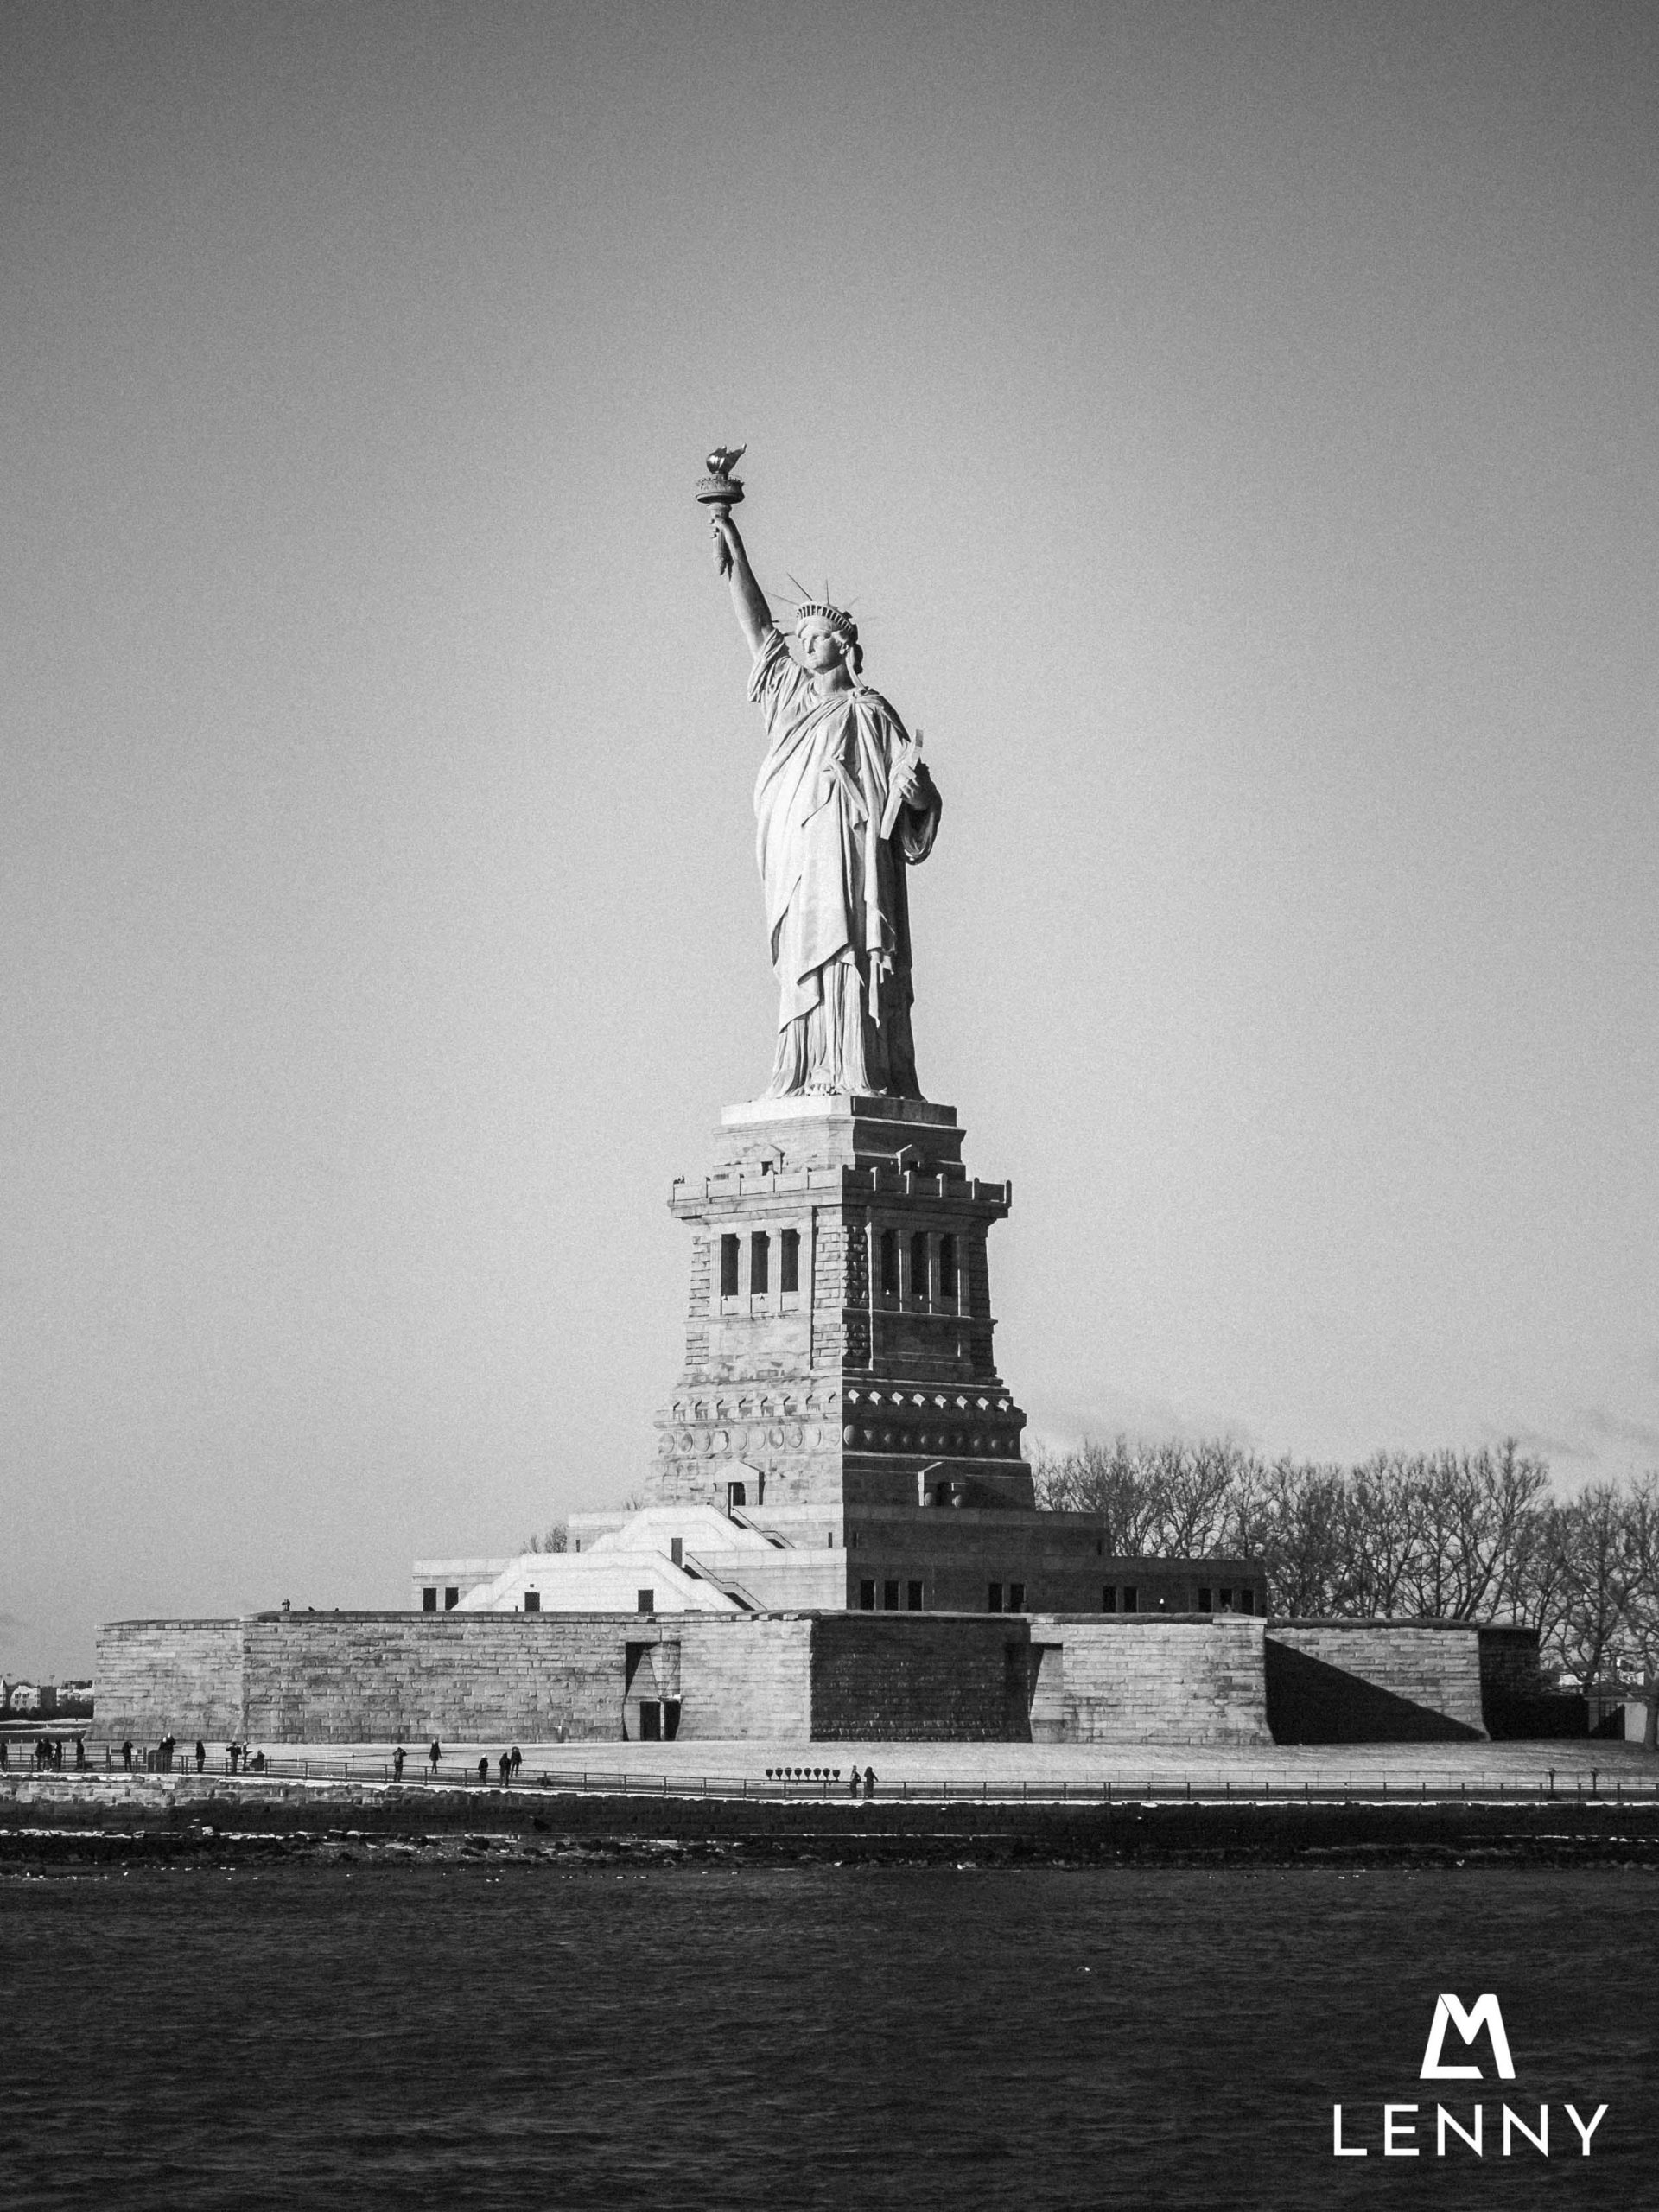 The Statue of Liberty symbolises freedom for people all over the world